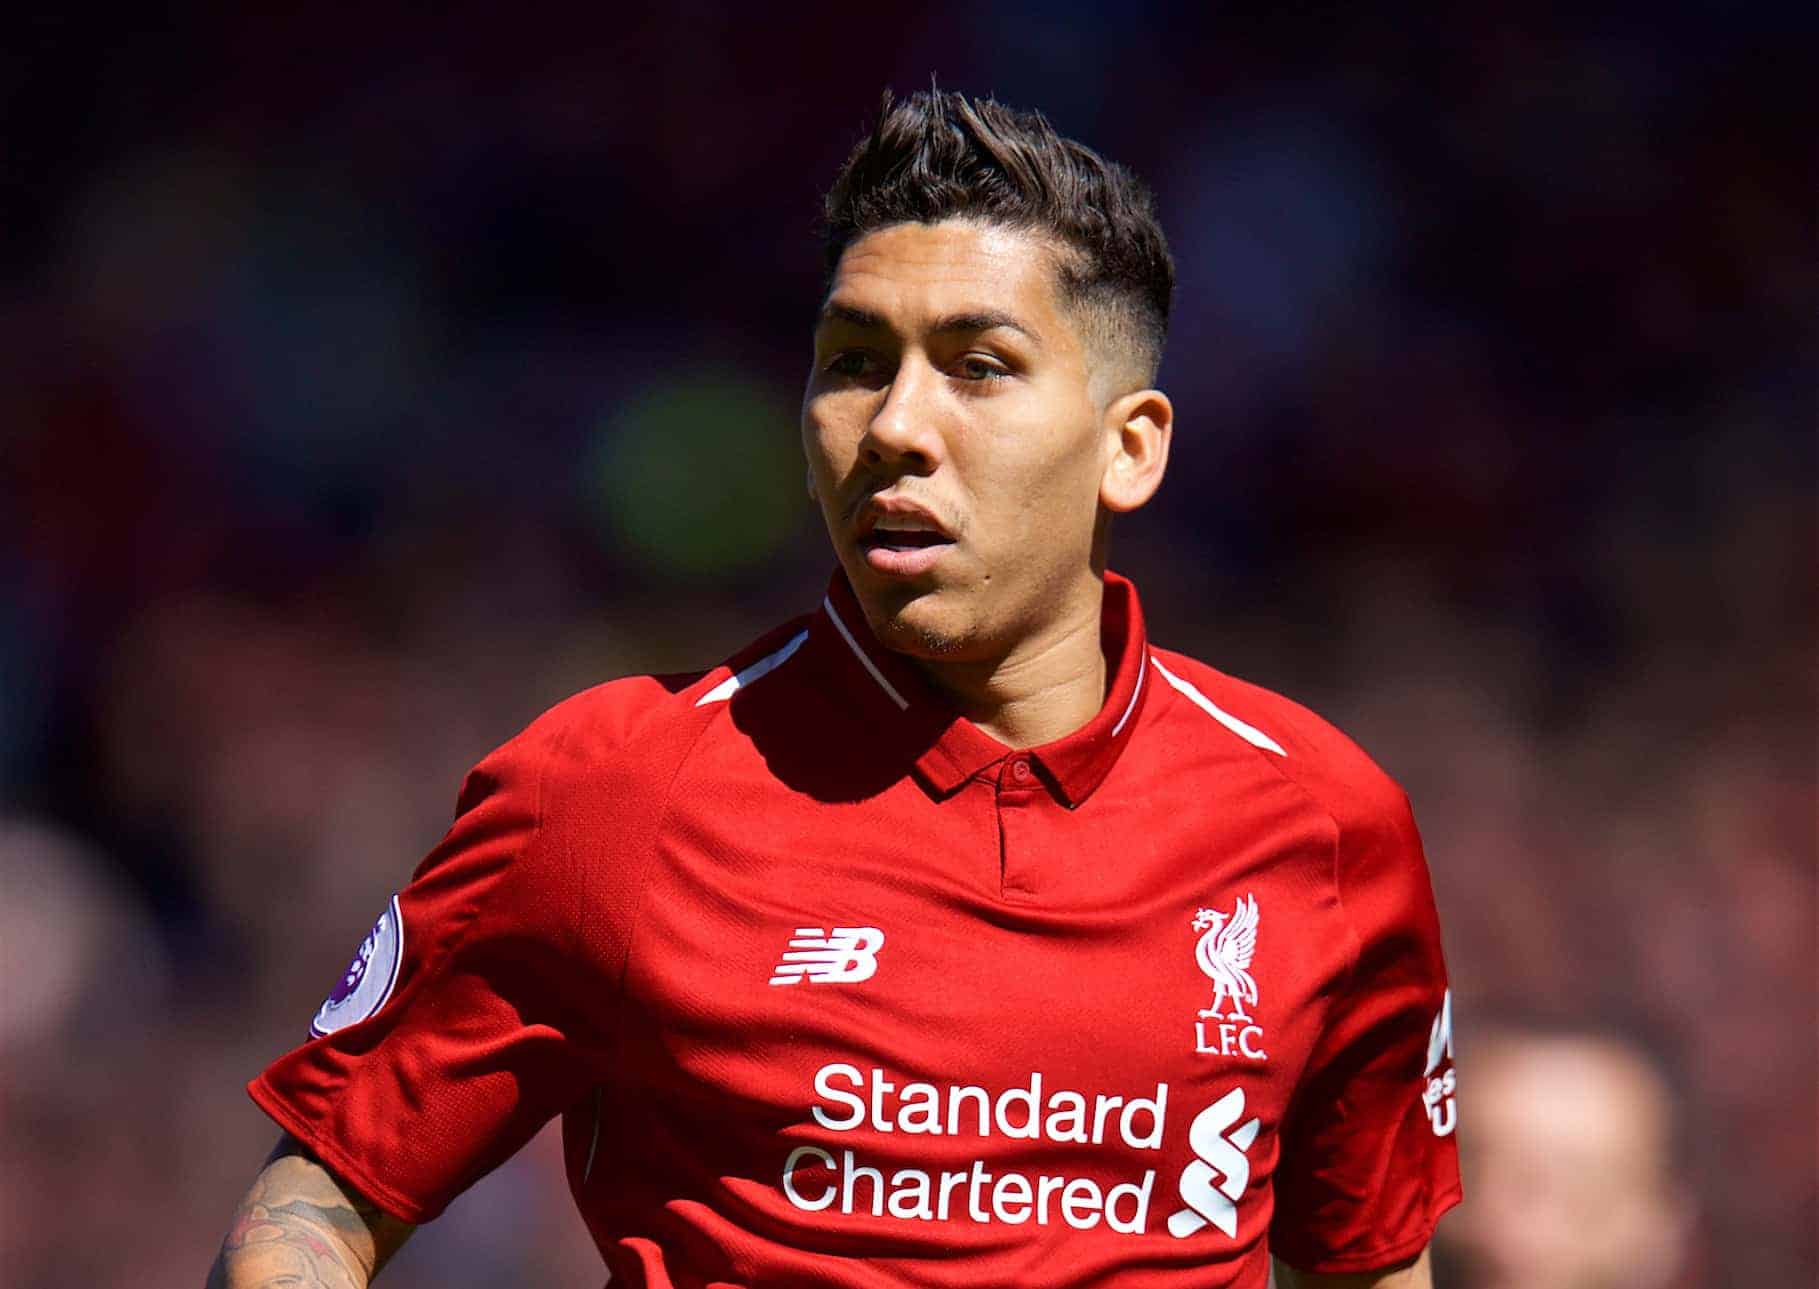 LIVERPOOL, ENGLAND - Sunday, May 13, 2018: Liverpool's Roberto Firmino during the FA Premier League match between Liverpool FC and Brighton & Hove Albion FC at Anfield. (Pic by David Rawcliffe/Propaganda)